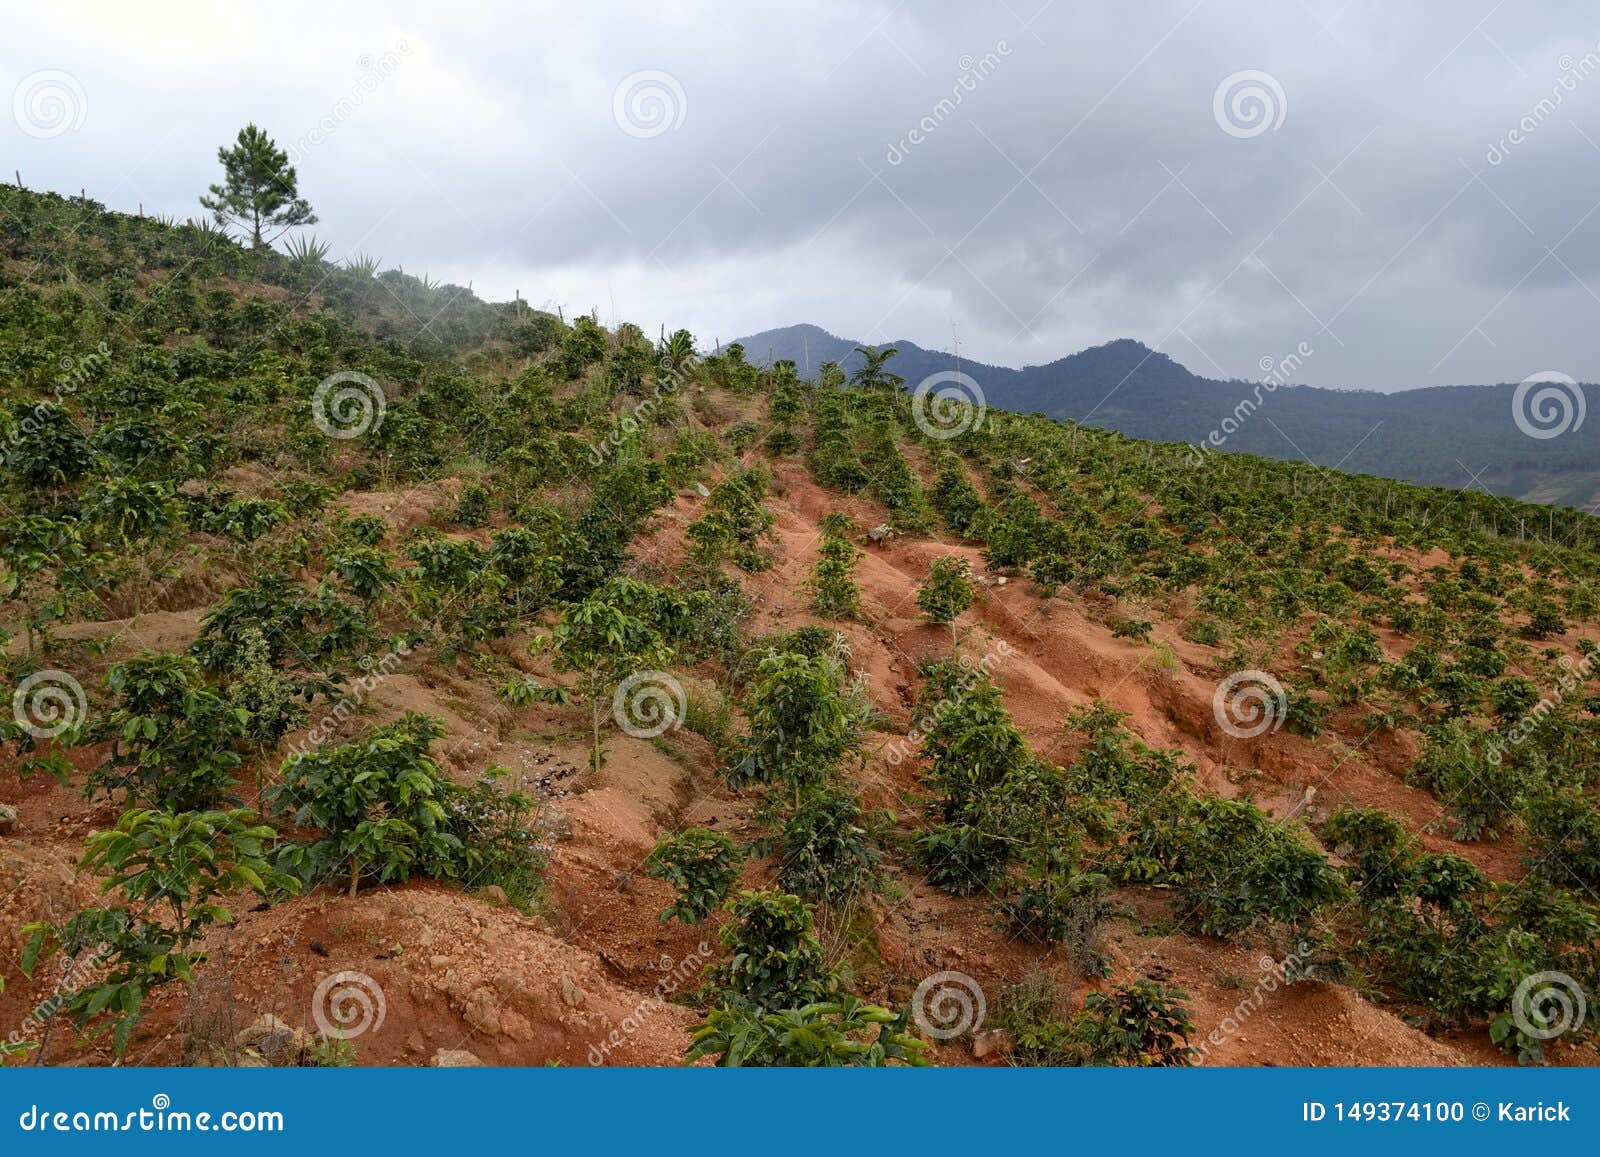 Vietnamese Coffee Plantations In The Mountains Stock Photo - Image of agriculture, hiking: 149374100